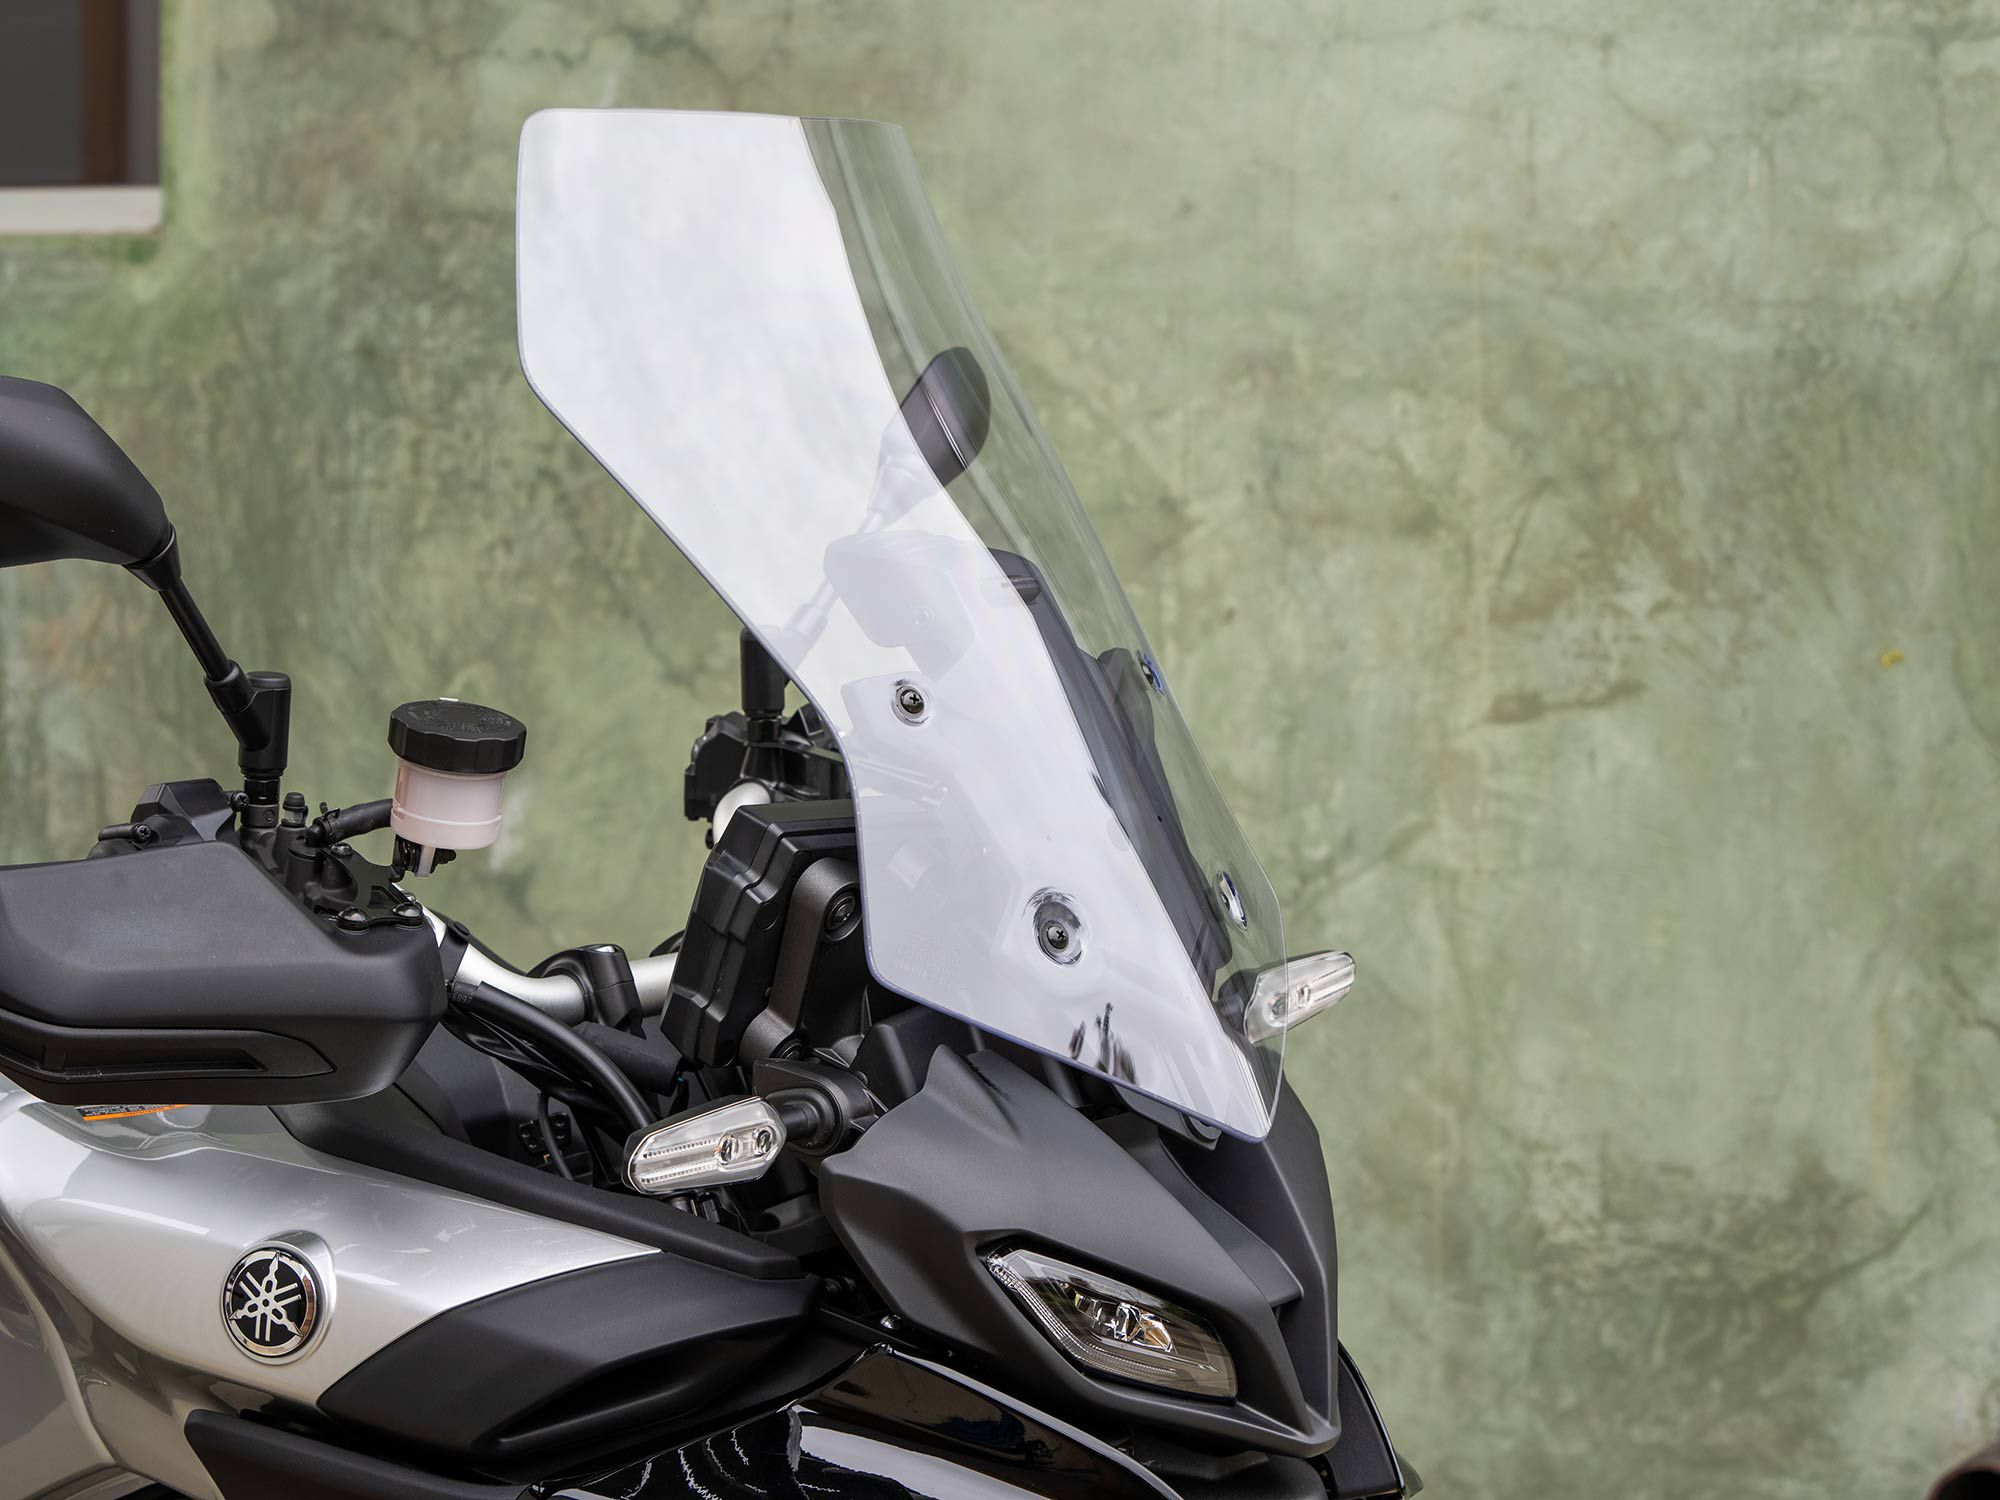 A tall, manually adjustable windscreen does a fine job of shielding the rider from the elements.